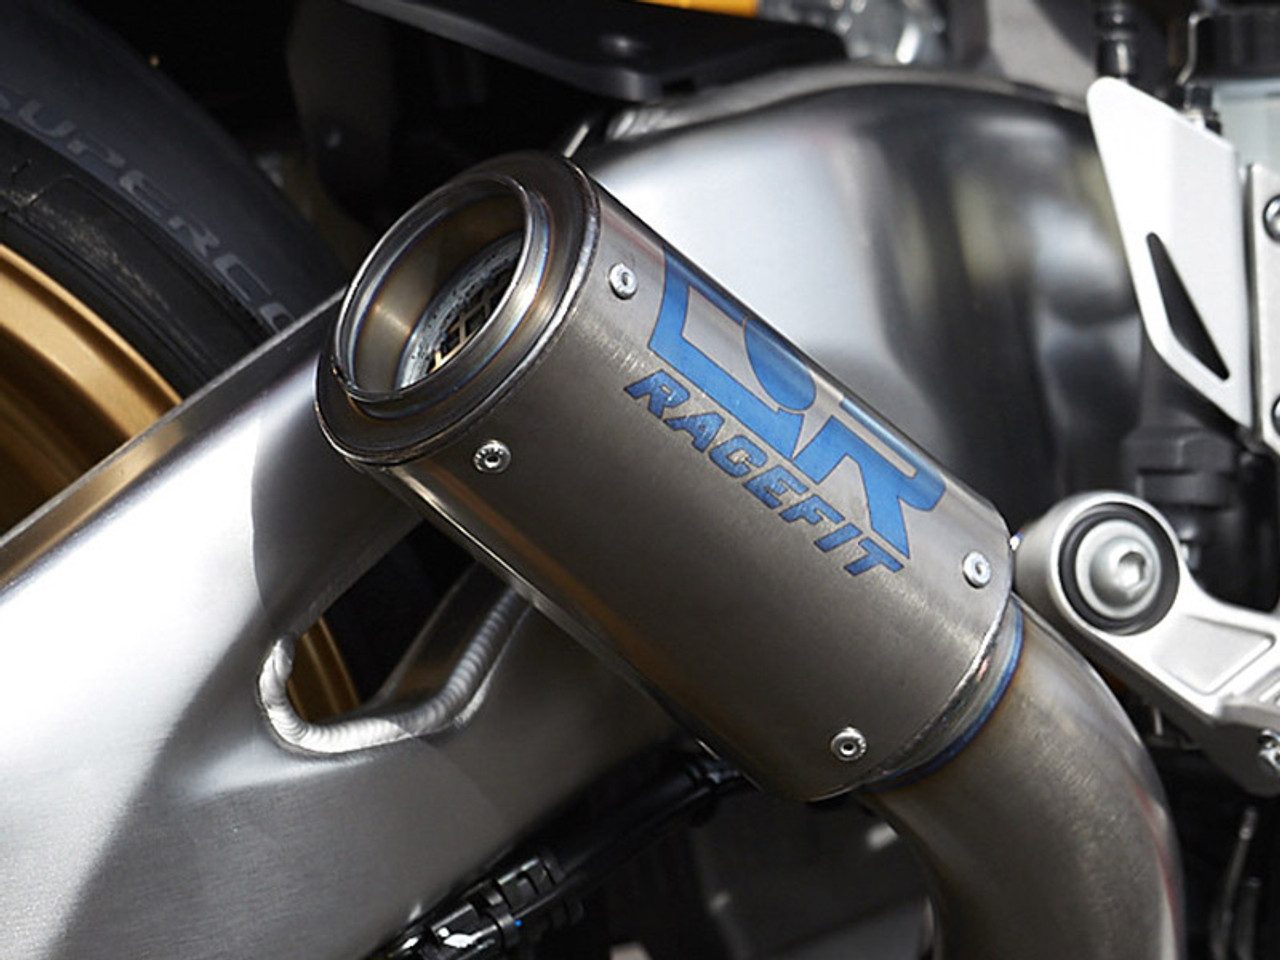 Spring Has Arrived !! Special Price !! Leovince LV-10 Slip-on Silencer  YZF-R6 '06 -'19, Slip On Exhausts